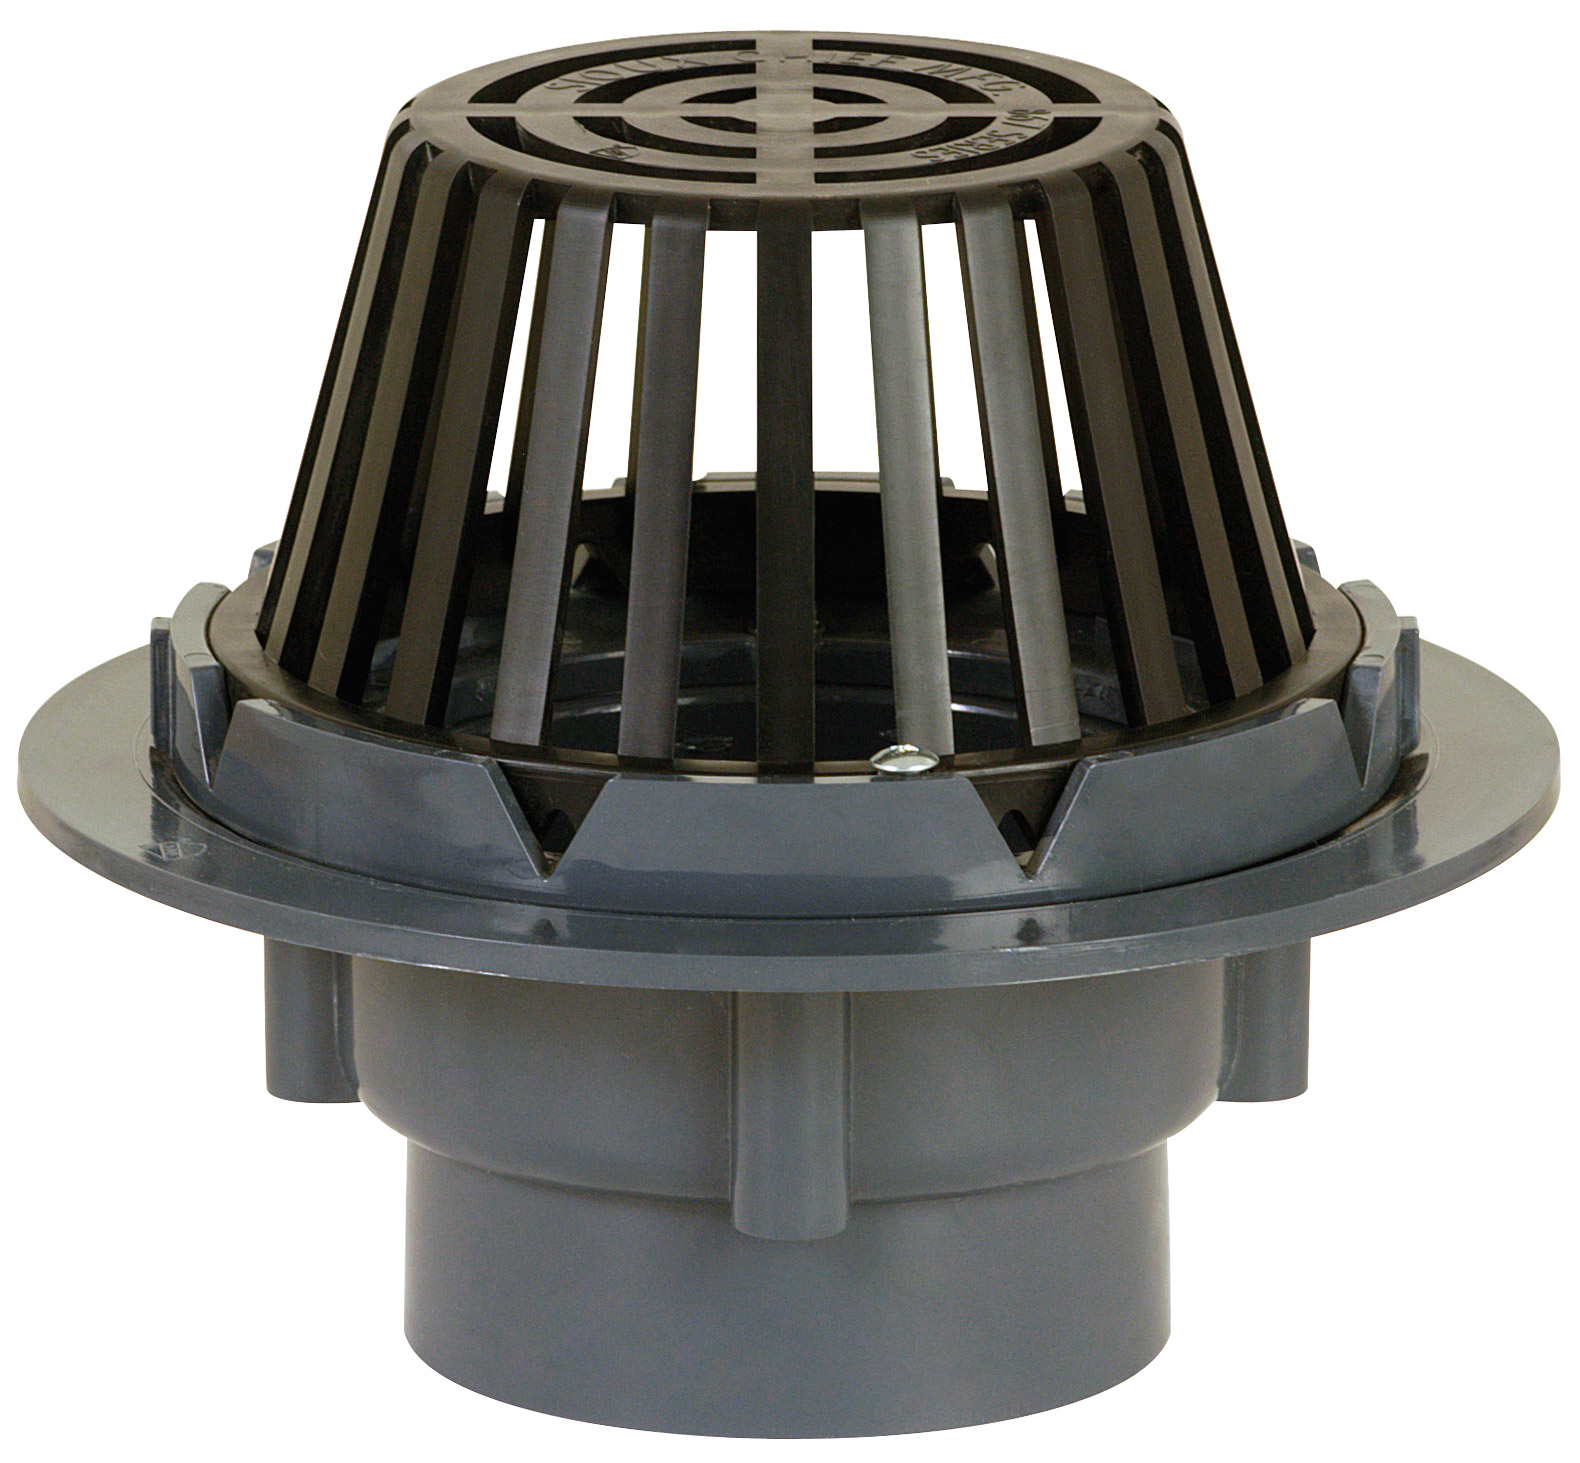 Drainage Commercial Drainage Roof Drains Light Commercial Roof Drains Sch. 40 Hub 867